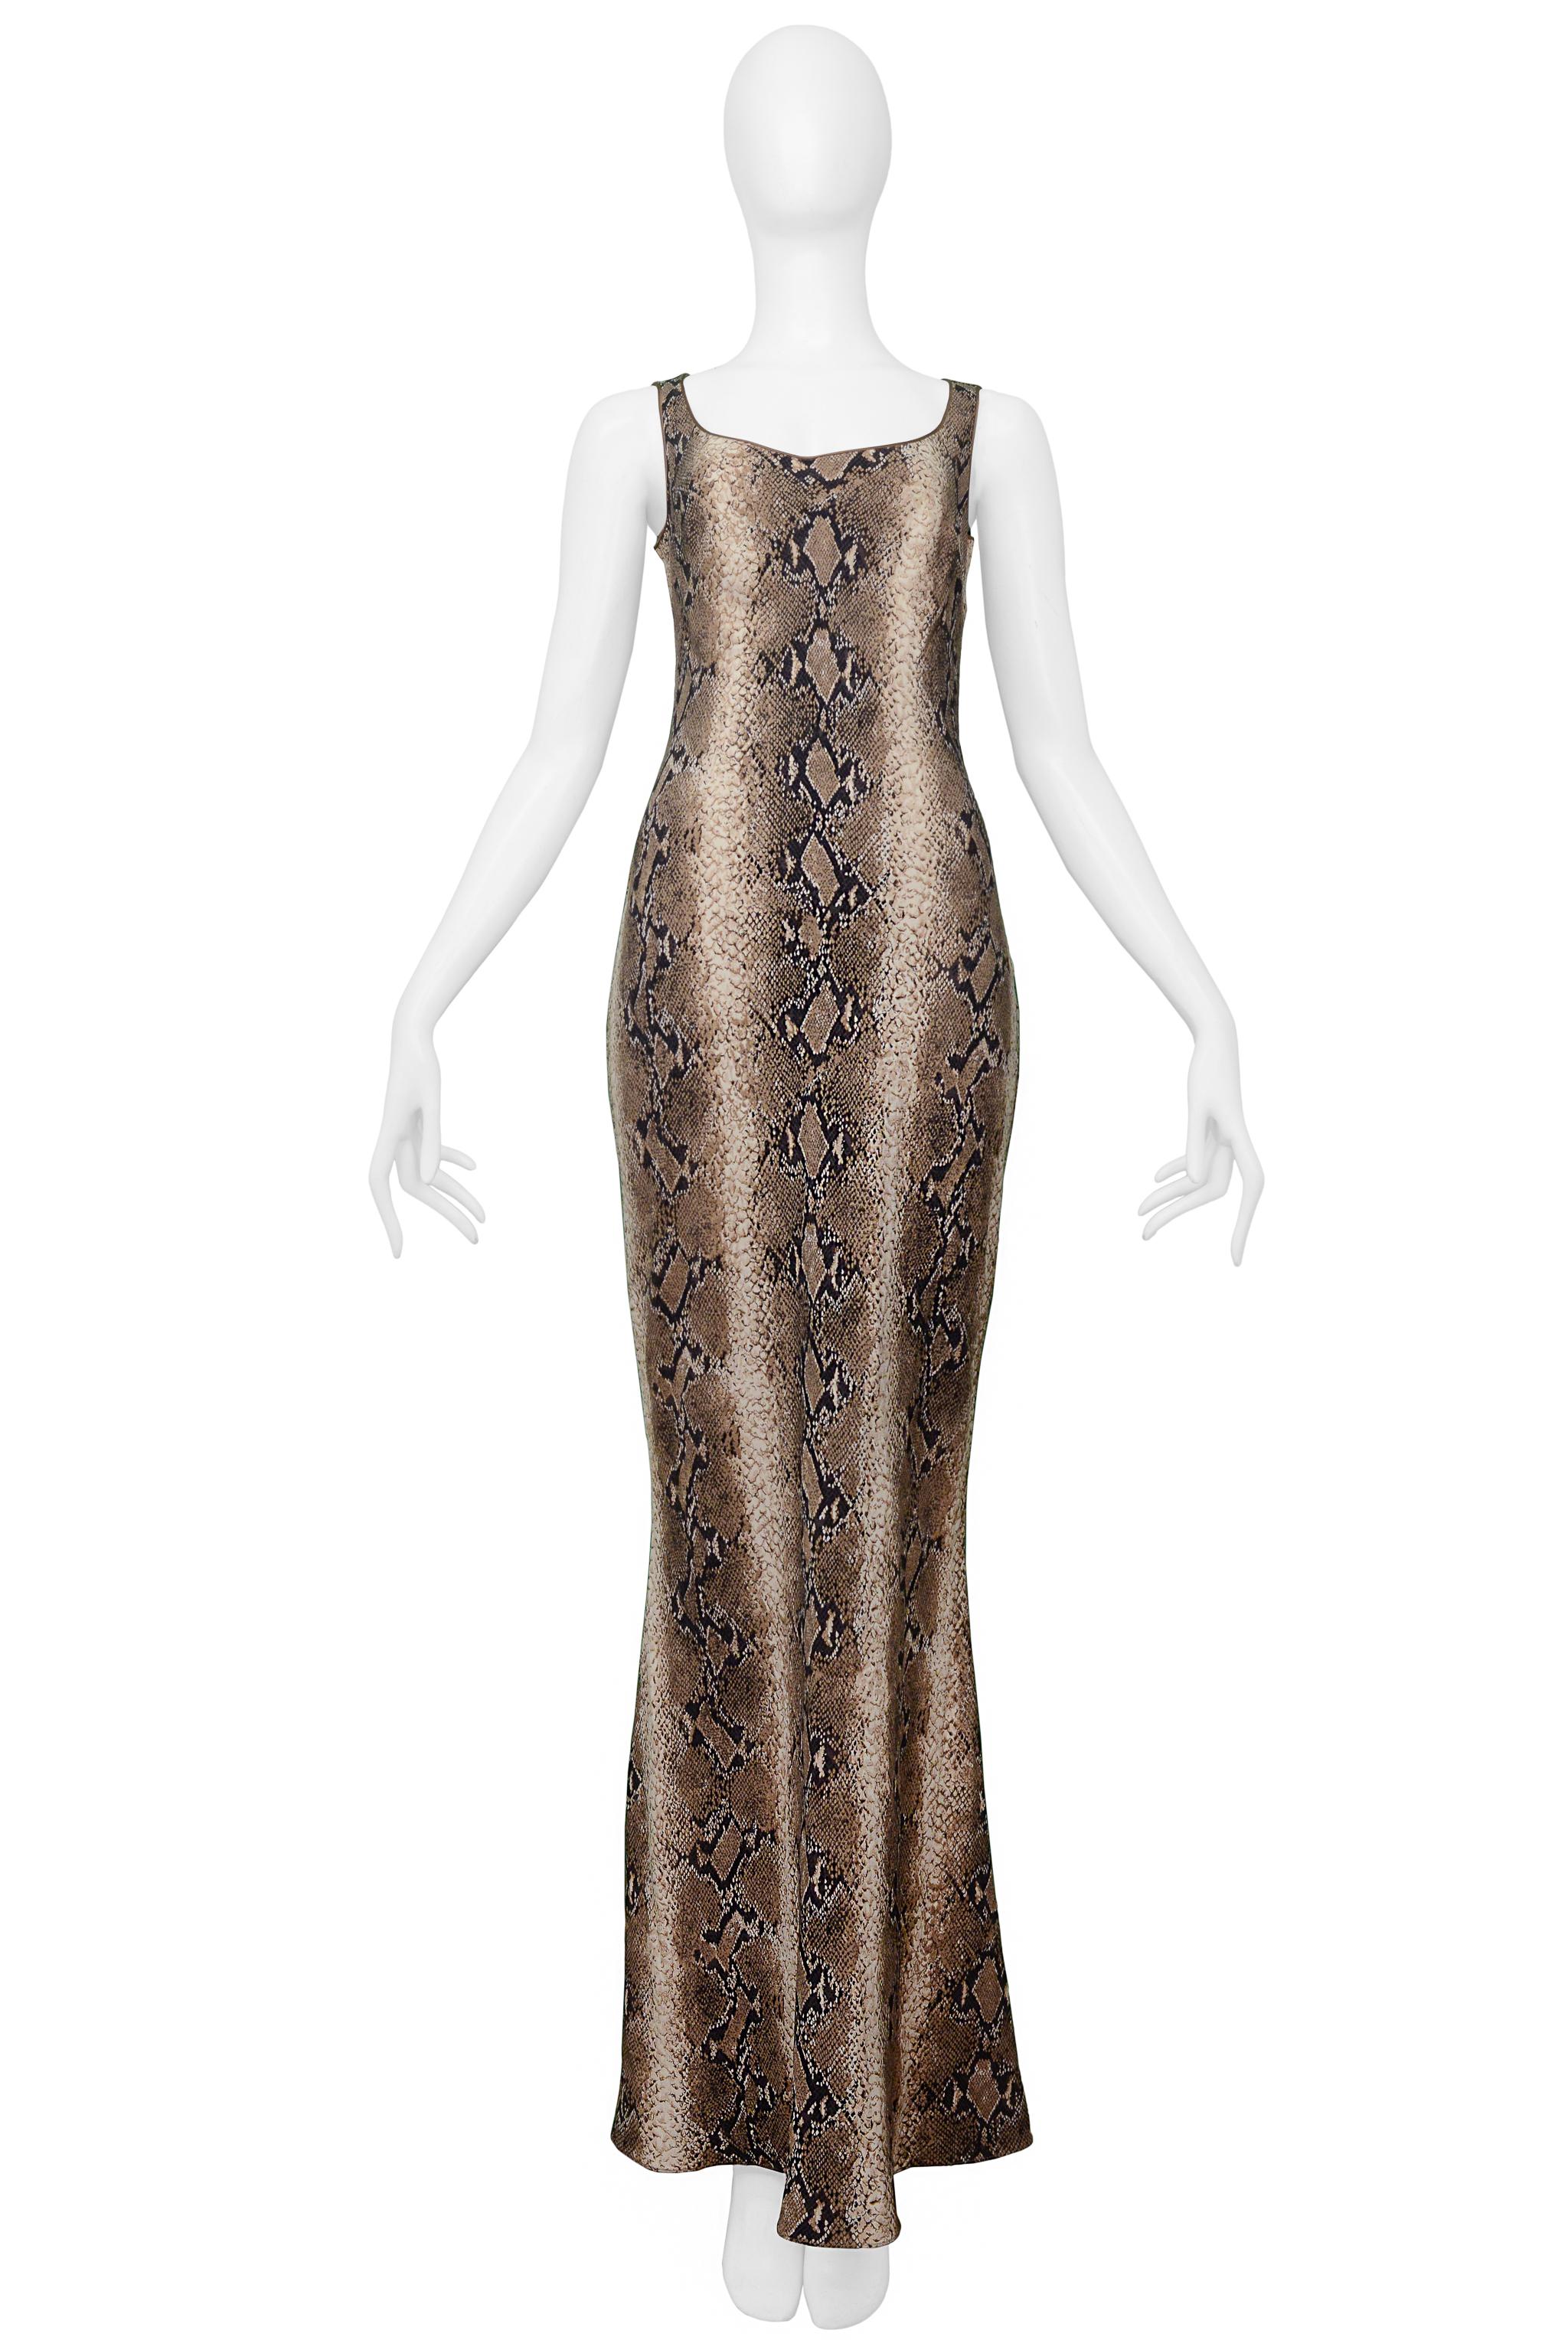 Resurrection Vintage is pleased to offer a vintage John Galliano brown tone maxi dress featuring a snakeskin print, taupe trim, side zipper, and maxi length.

John Galliano 
Size 40
Knit
Excellent Vintage Condition 
Authenticity Guaranteed 